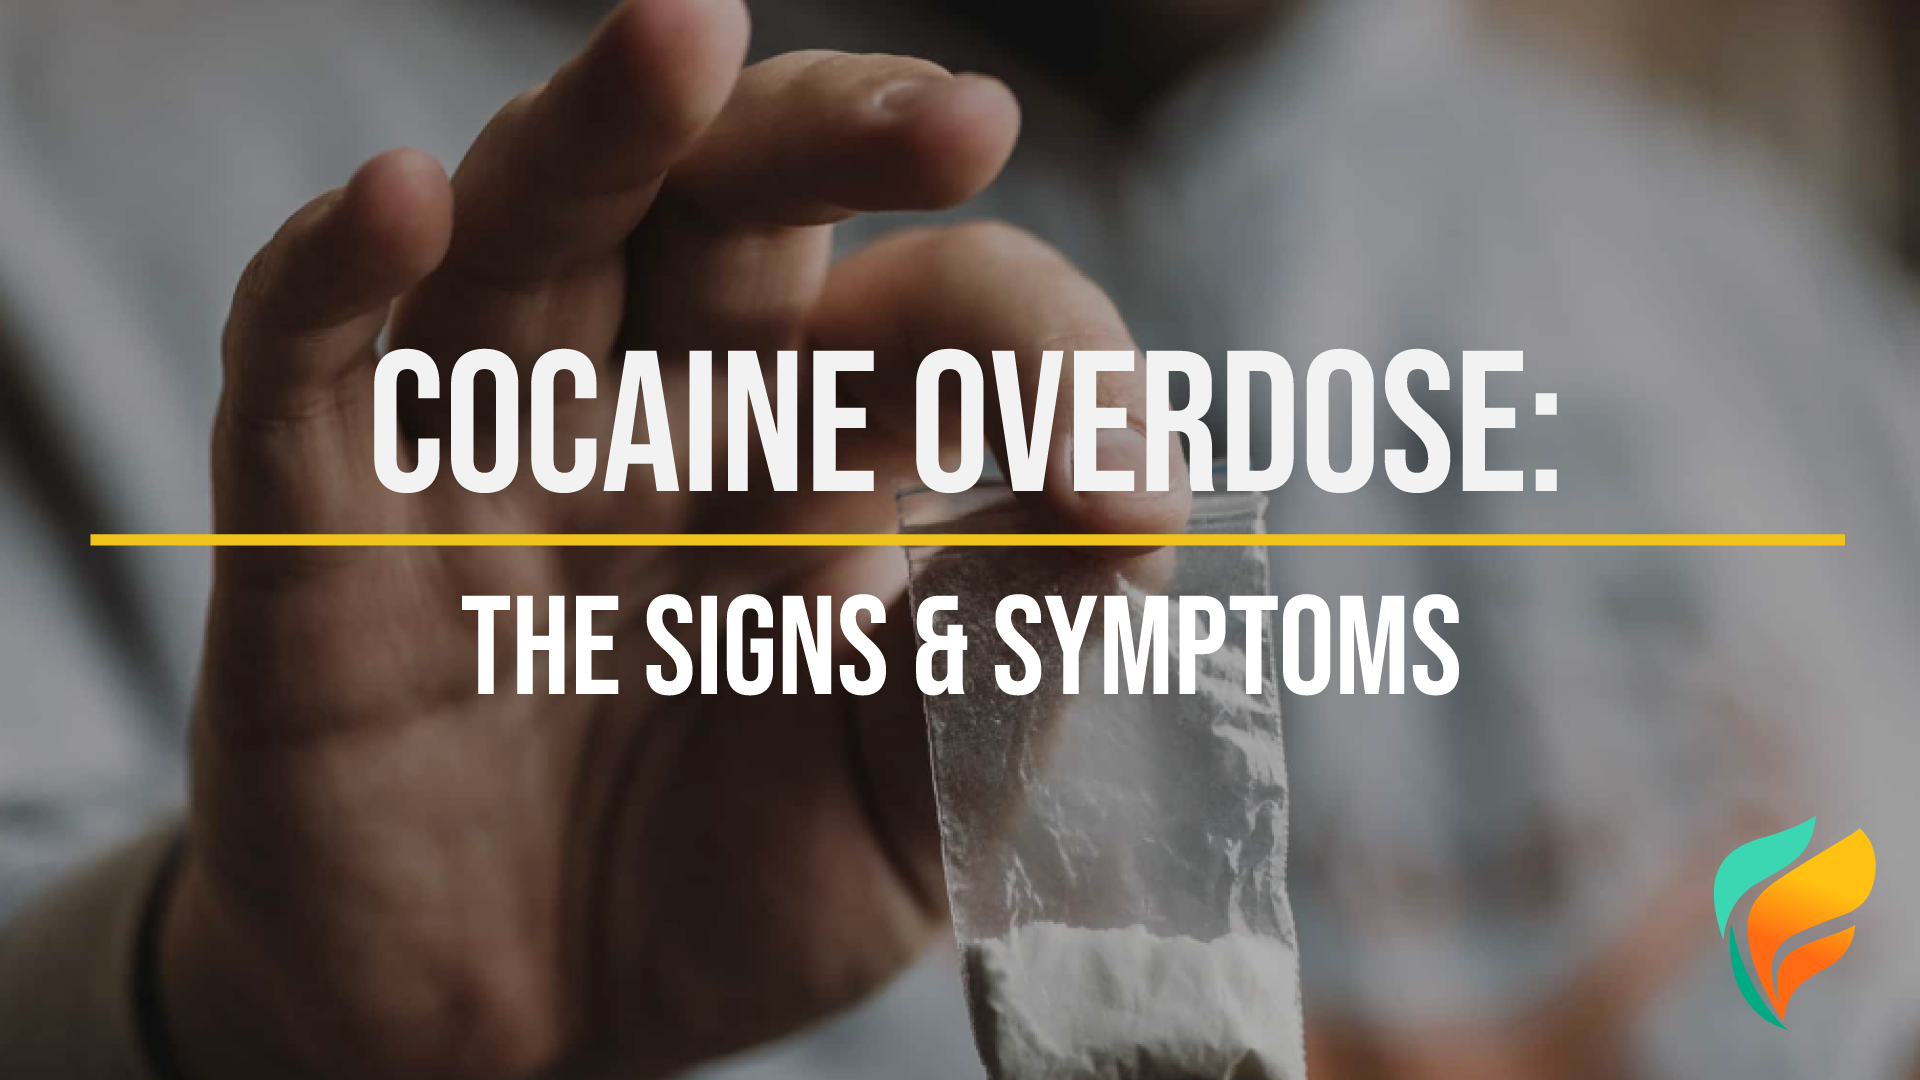 What are the symptoms of a cocaine overdose?